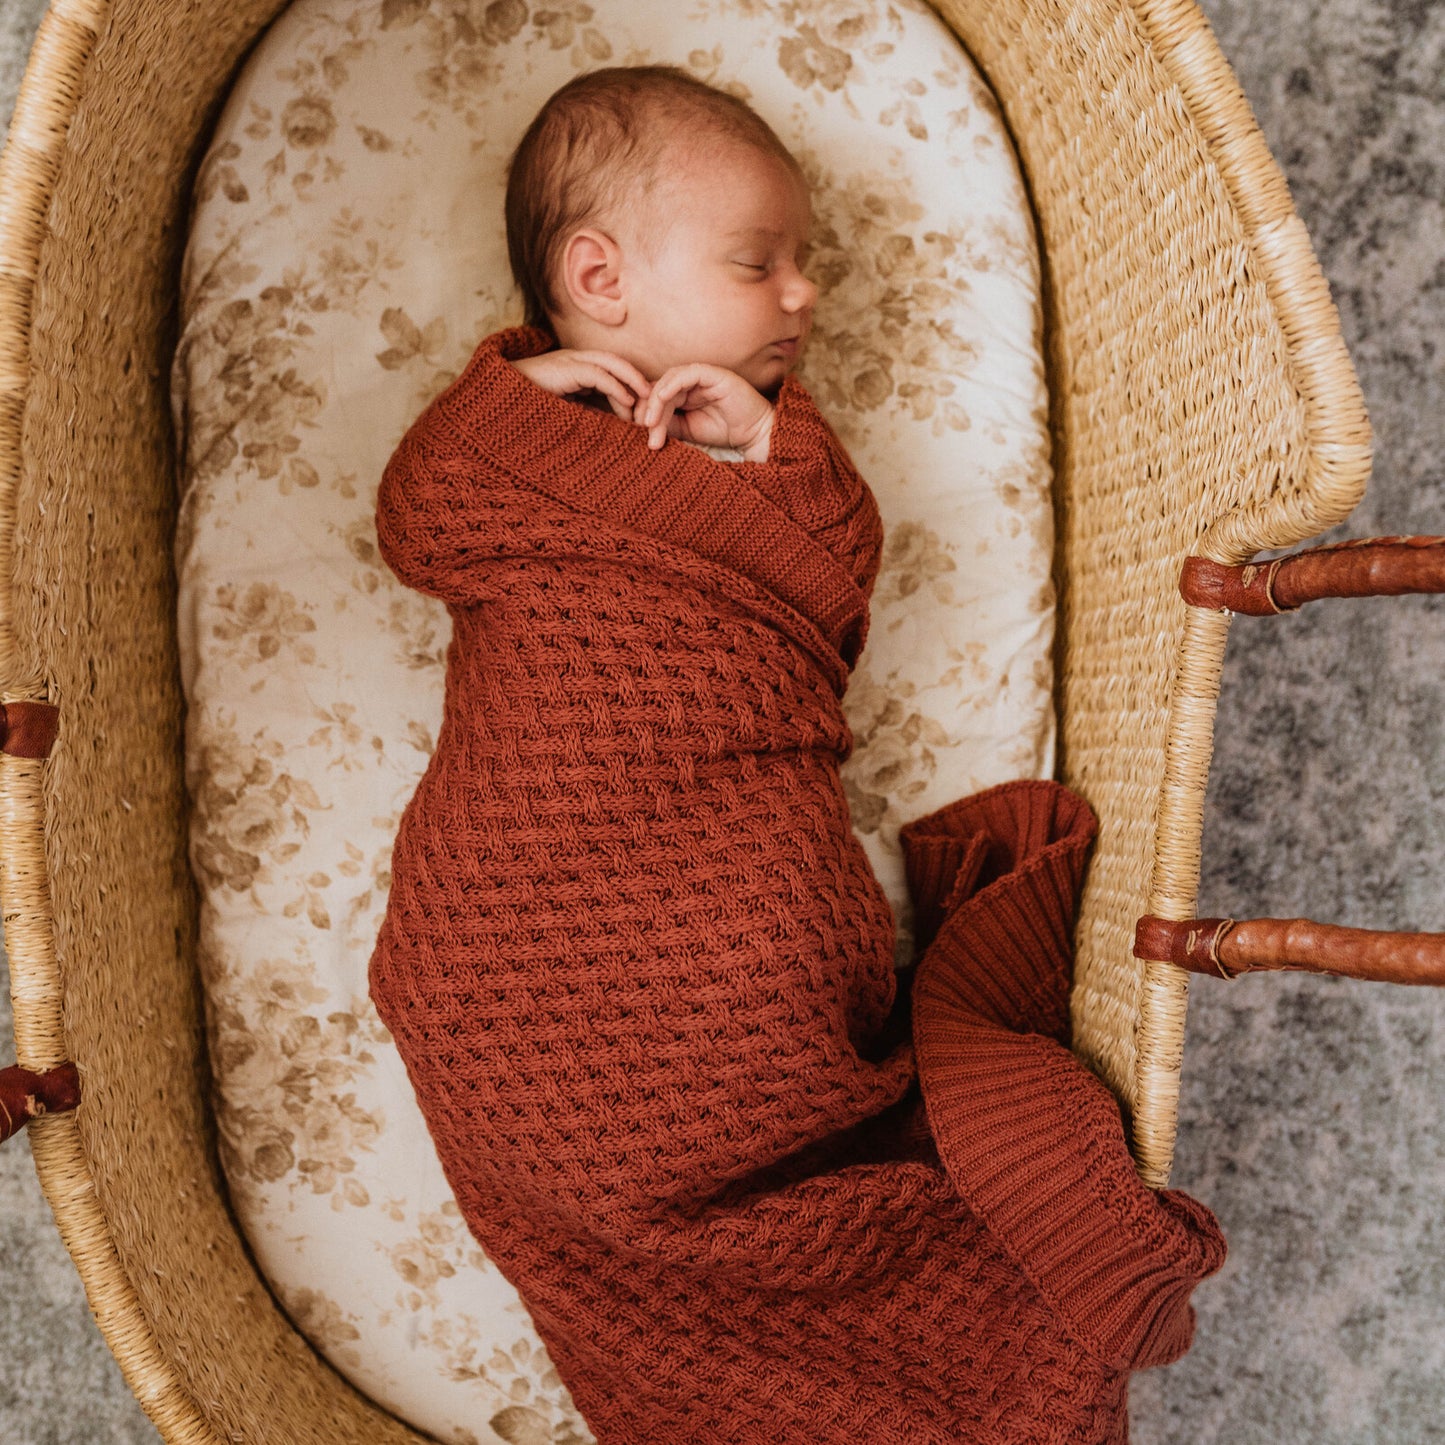 Umber diamond knit baby blanket from Snuggle Hunny Kids is now available on Sugarbird kids.